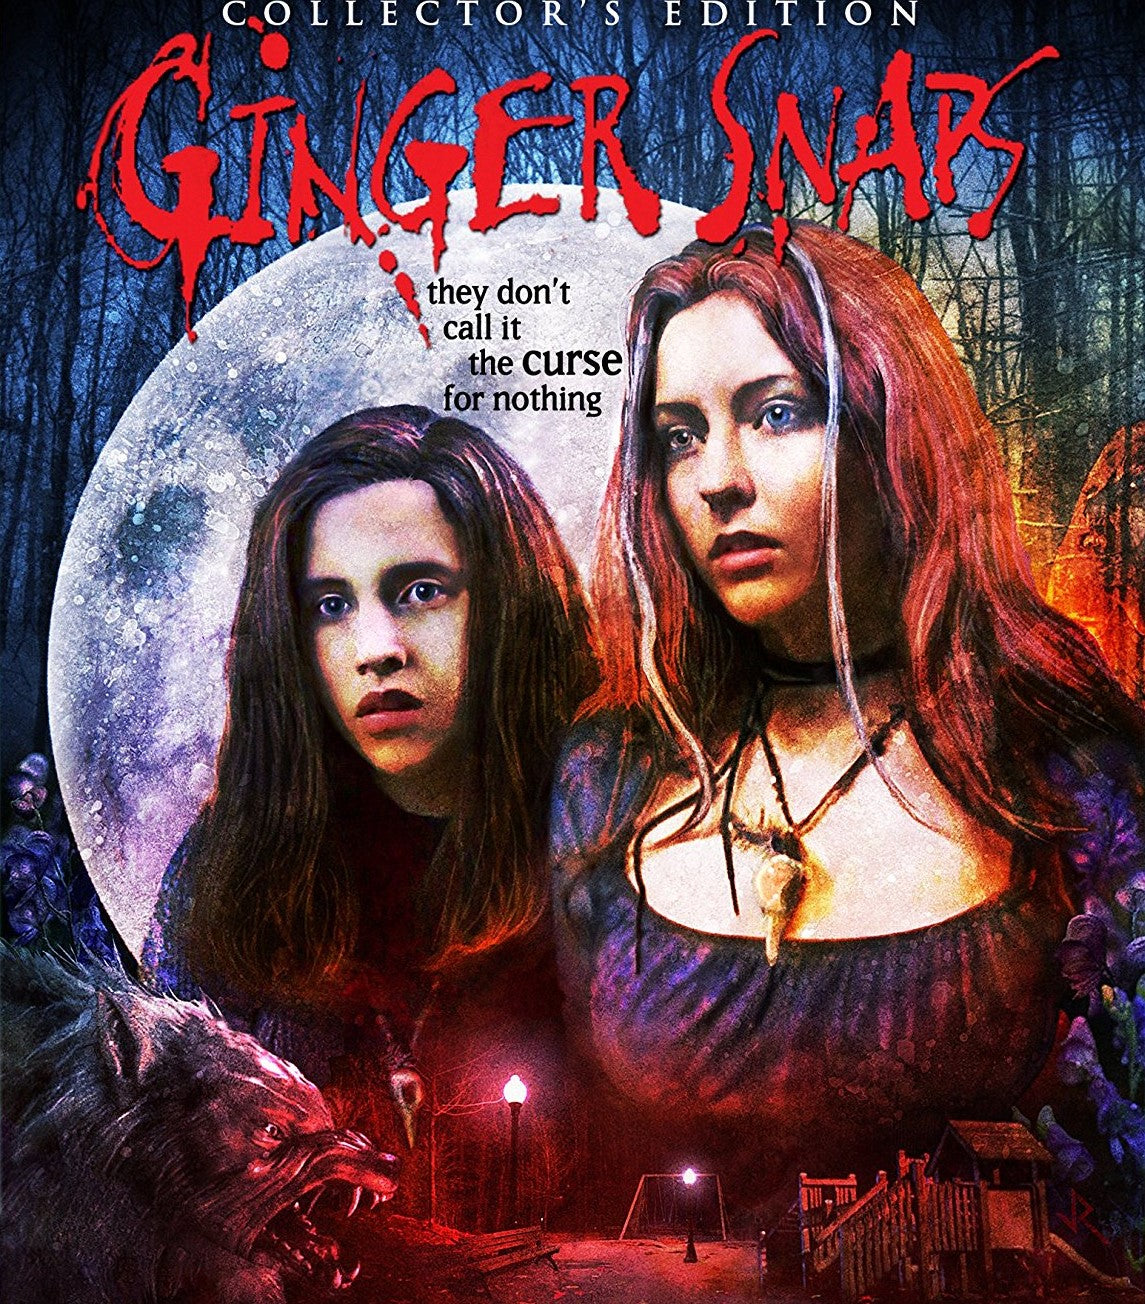 Ginger Snaps (Collectors Edition) Blu-Ray/dvd Blu-Ray